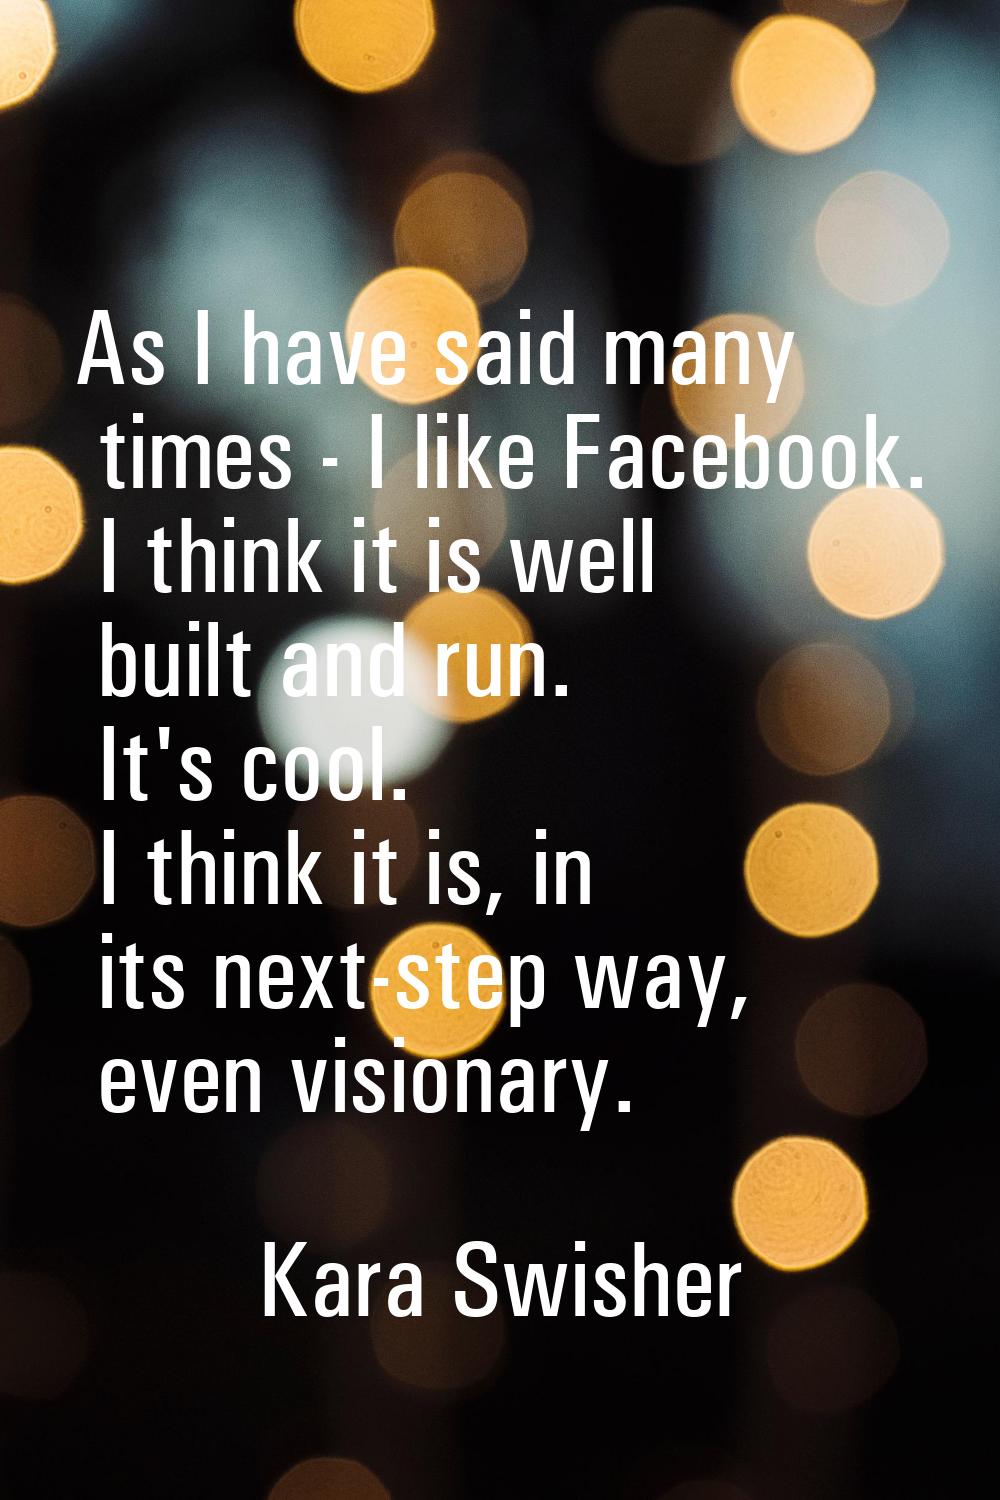 As I have said many times - I like Facebook. I think it is well built and run. It's cool. I think i